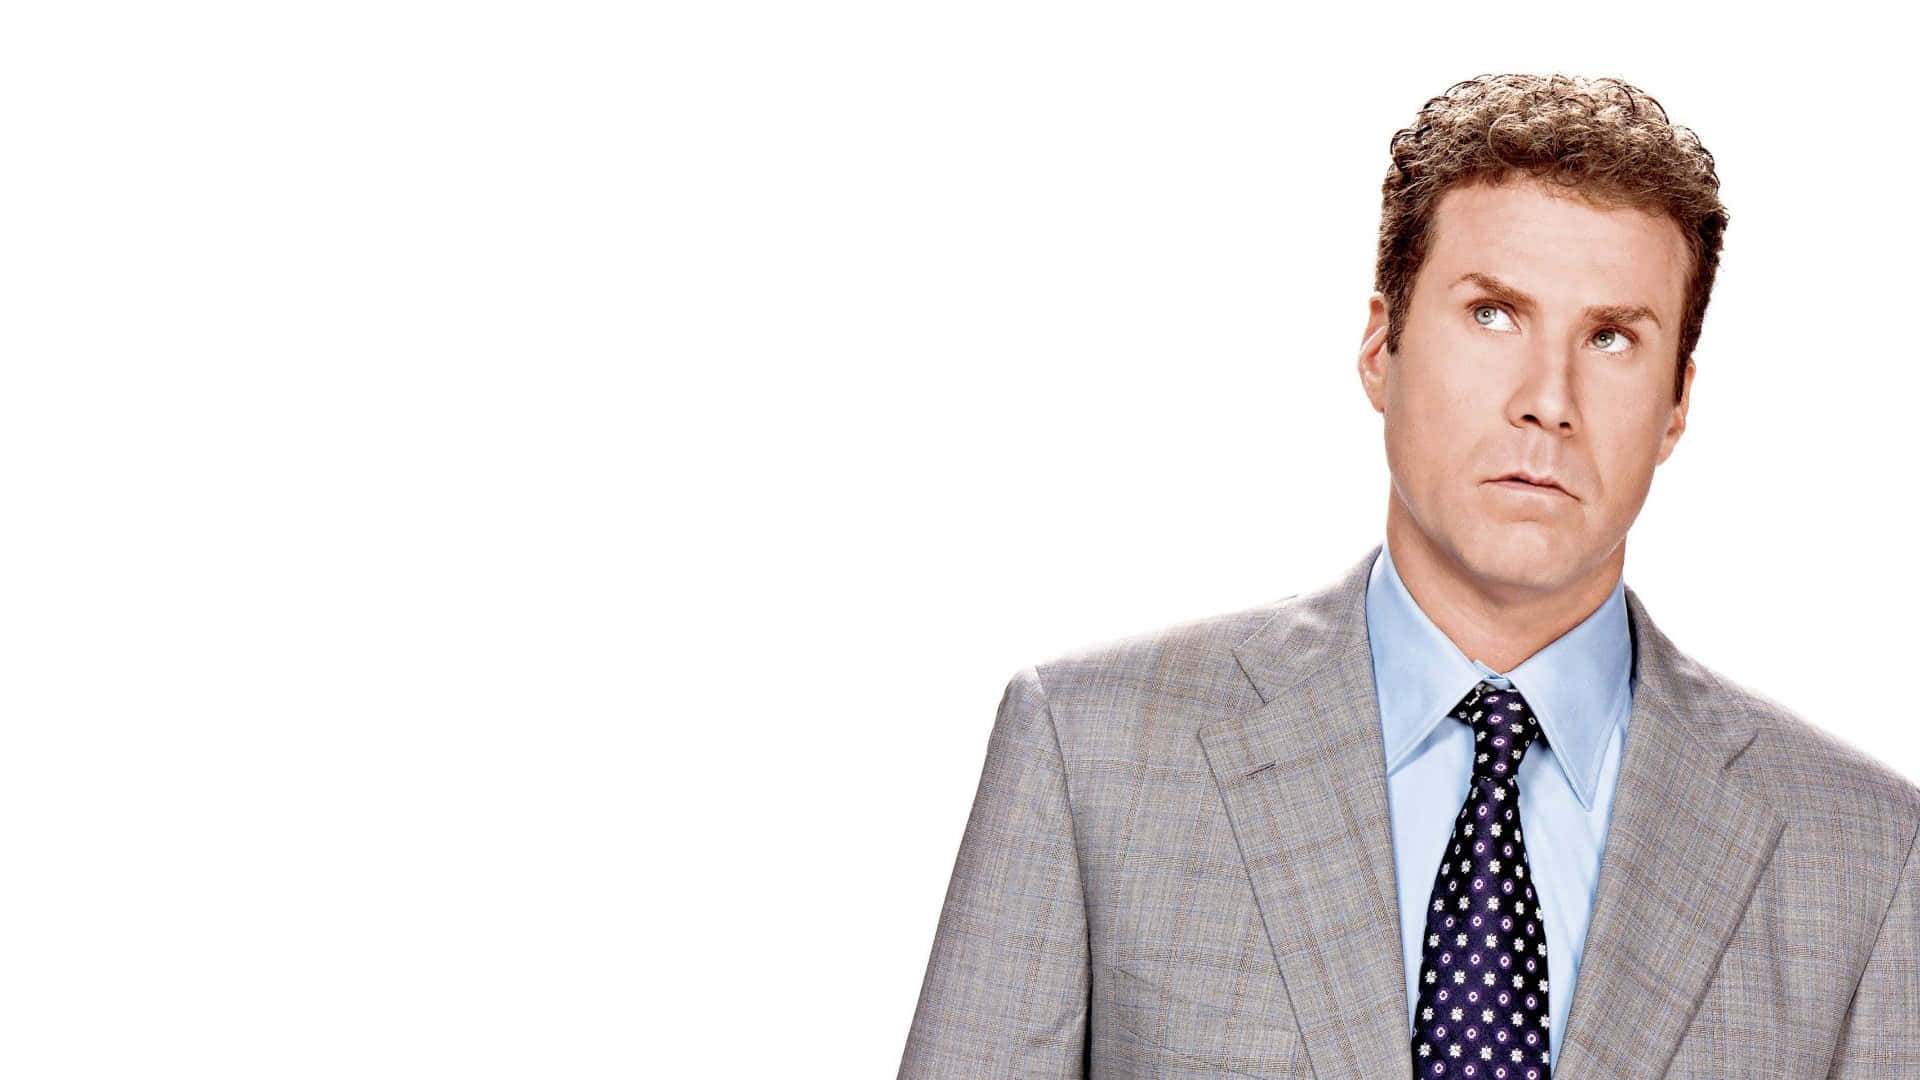 Will Ferrell striking a cool pose wearing a blue suit and tie Wallpaper